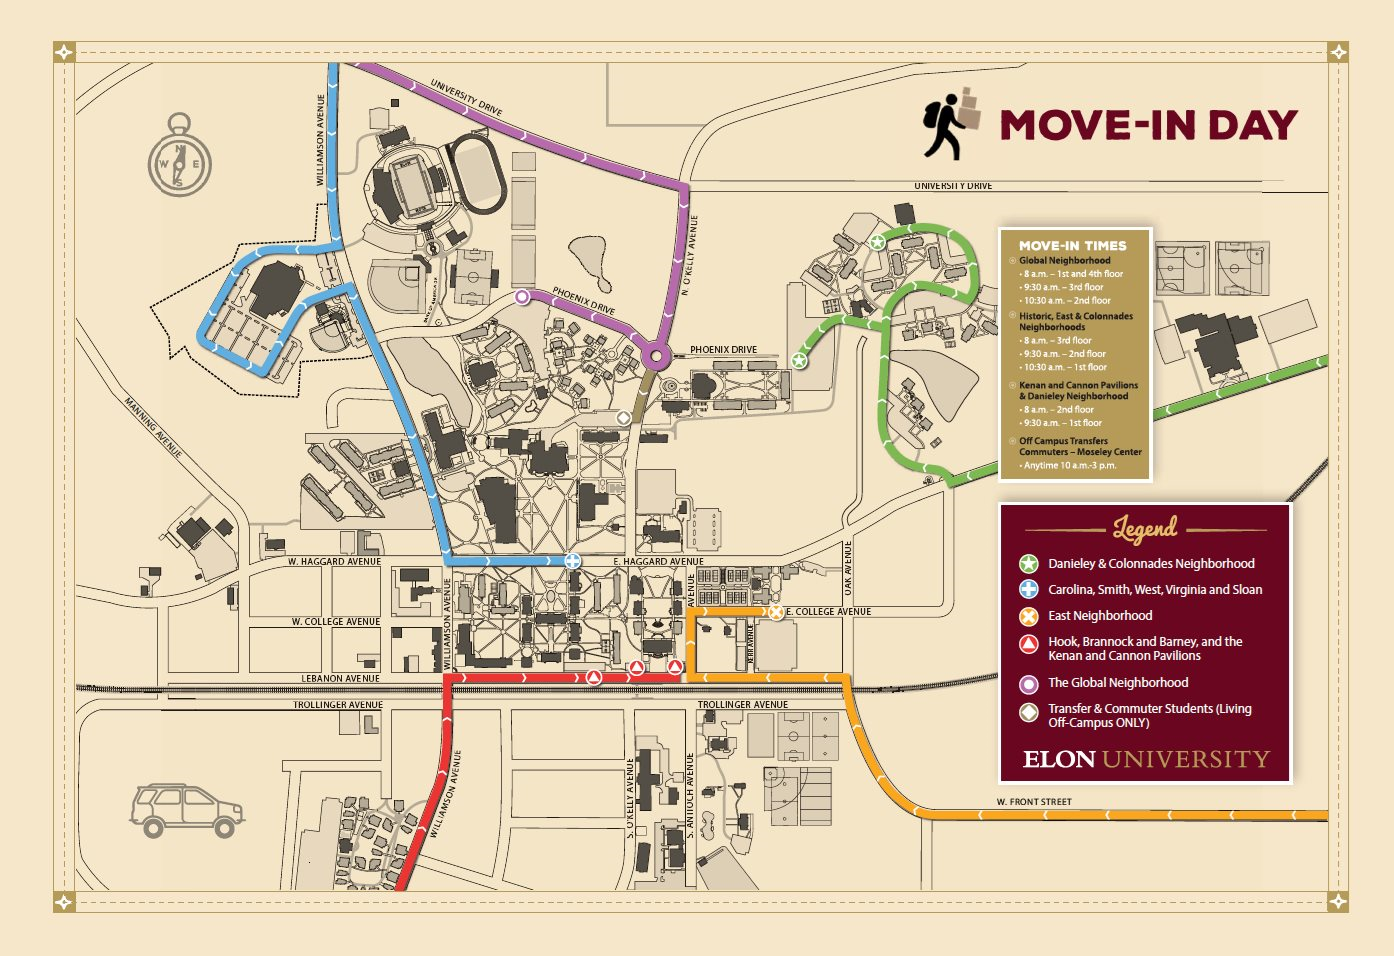 Movein day map shows the routes for new students to follow to campus